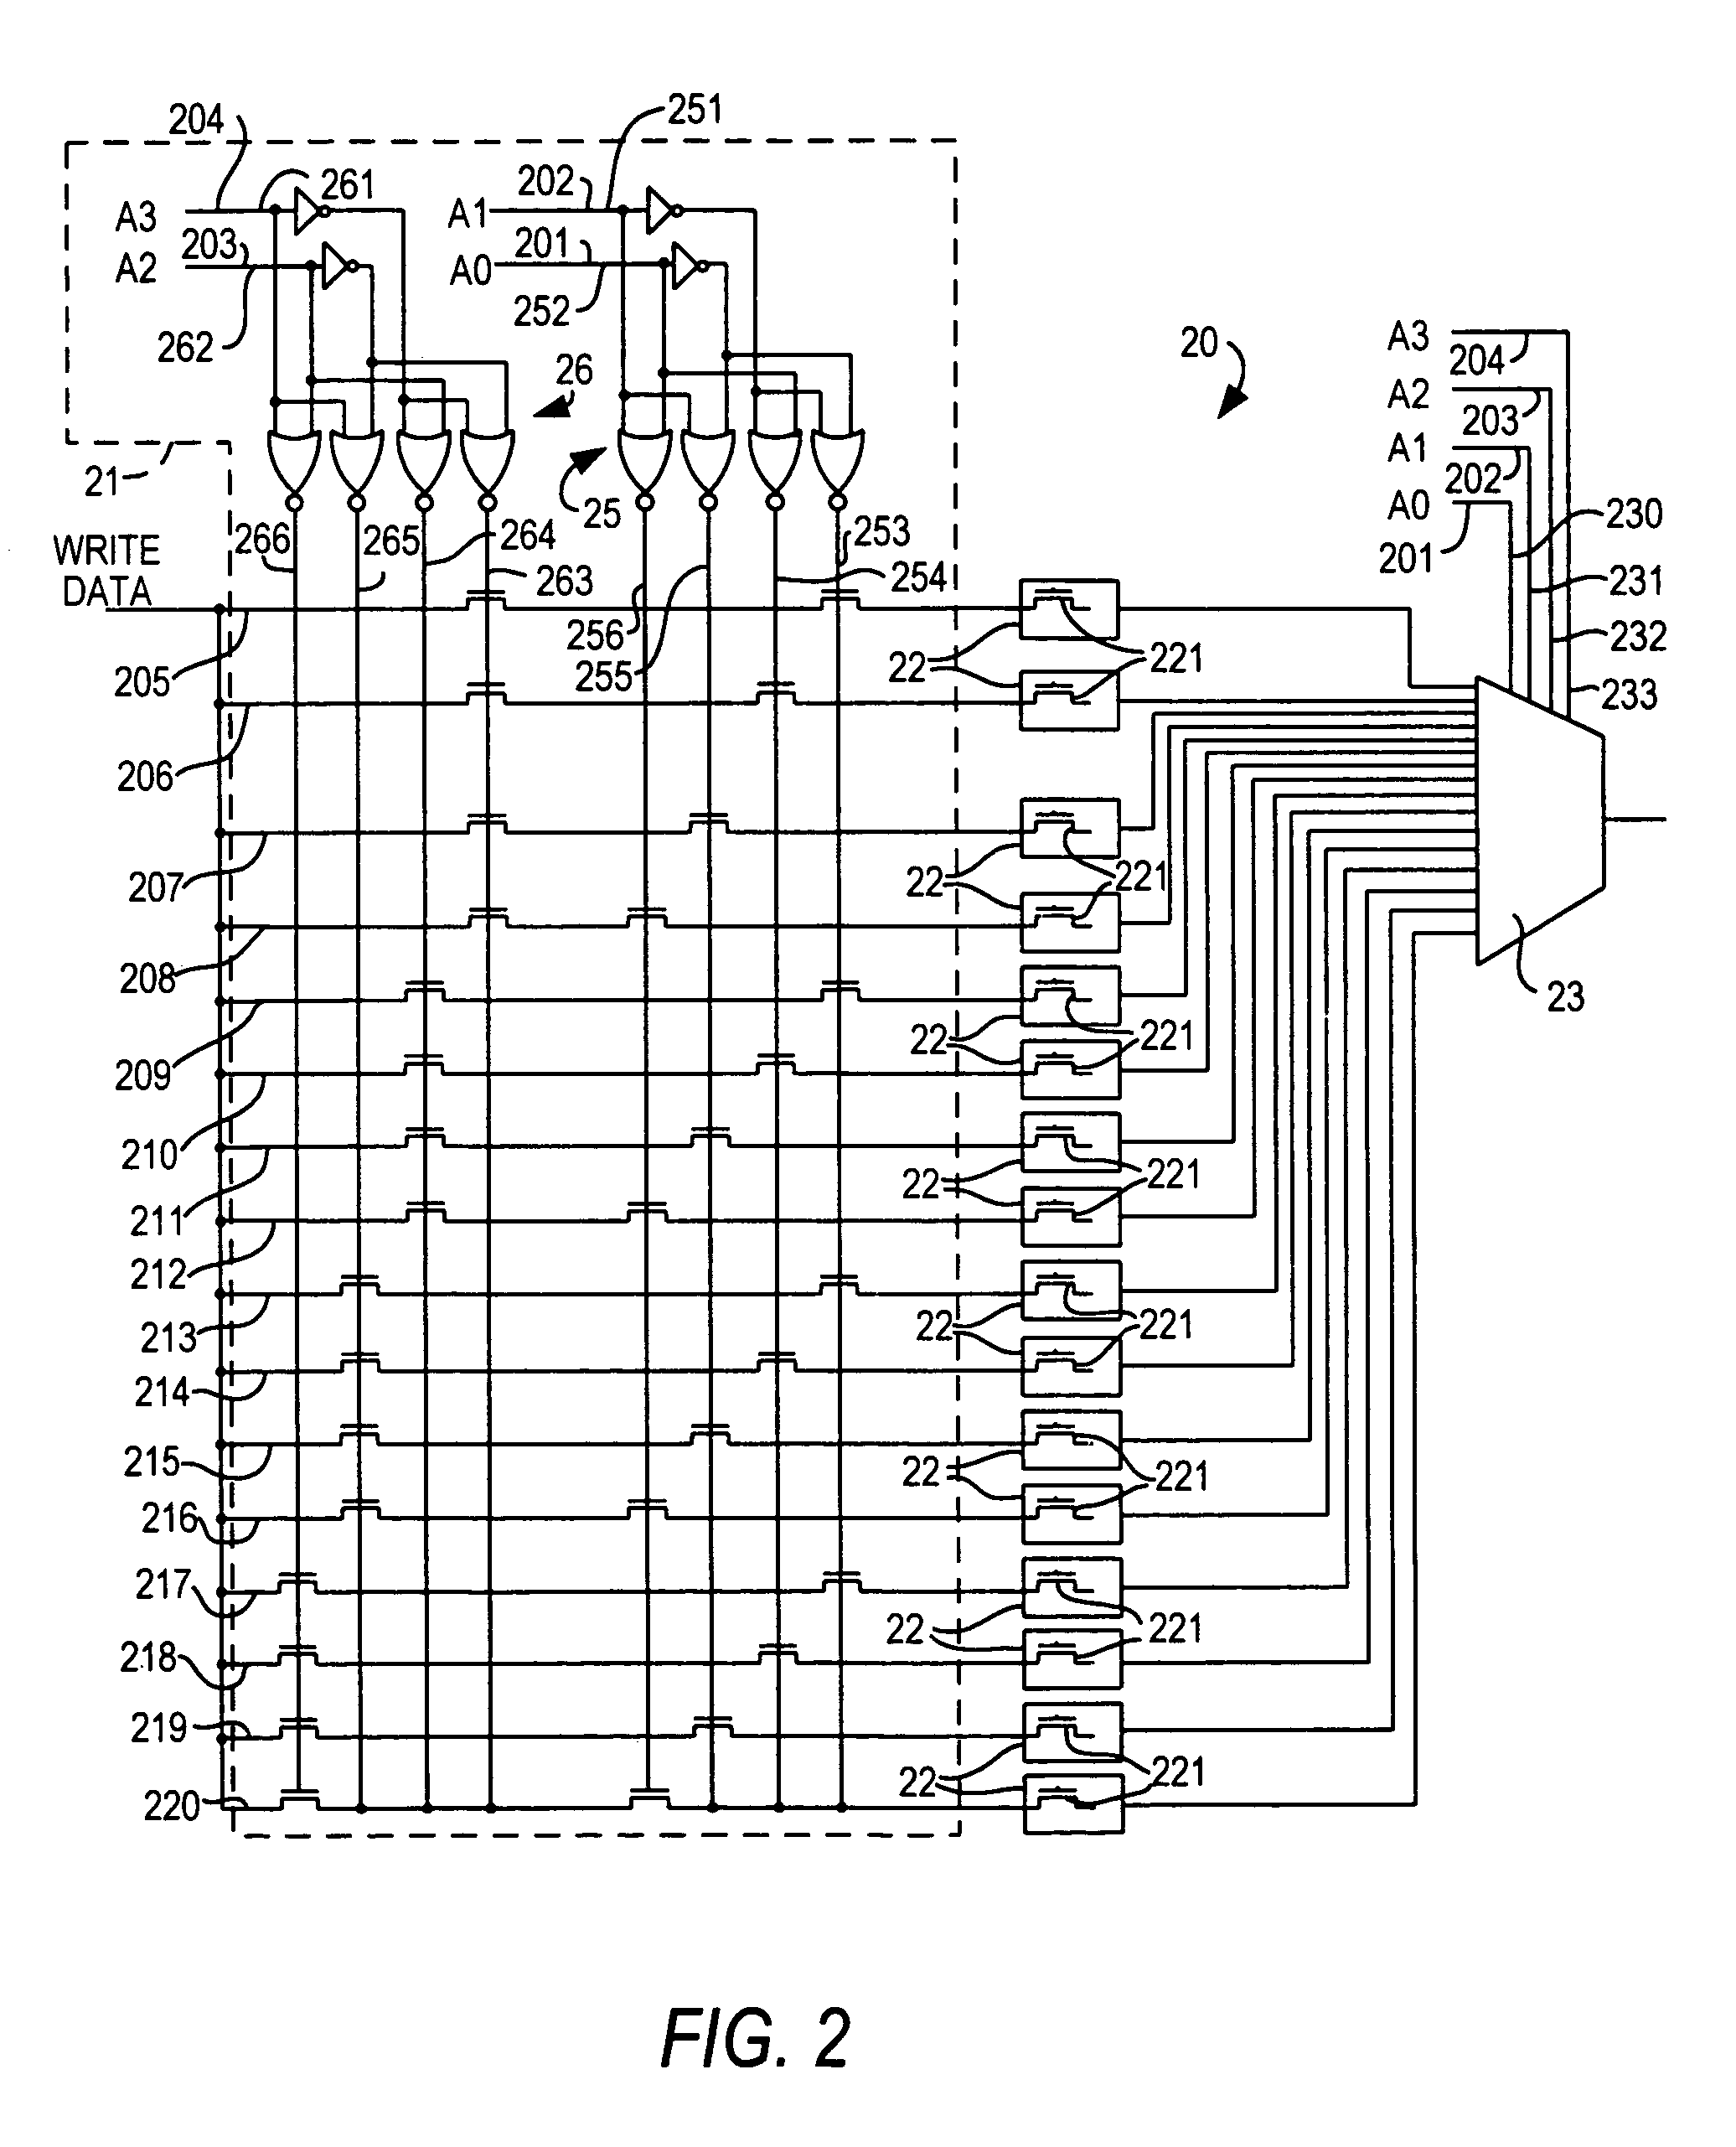 Distributed random access memory in a programmable logic device